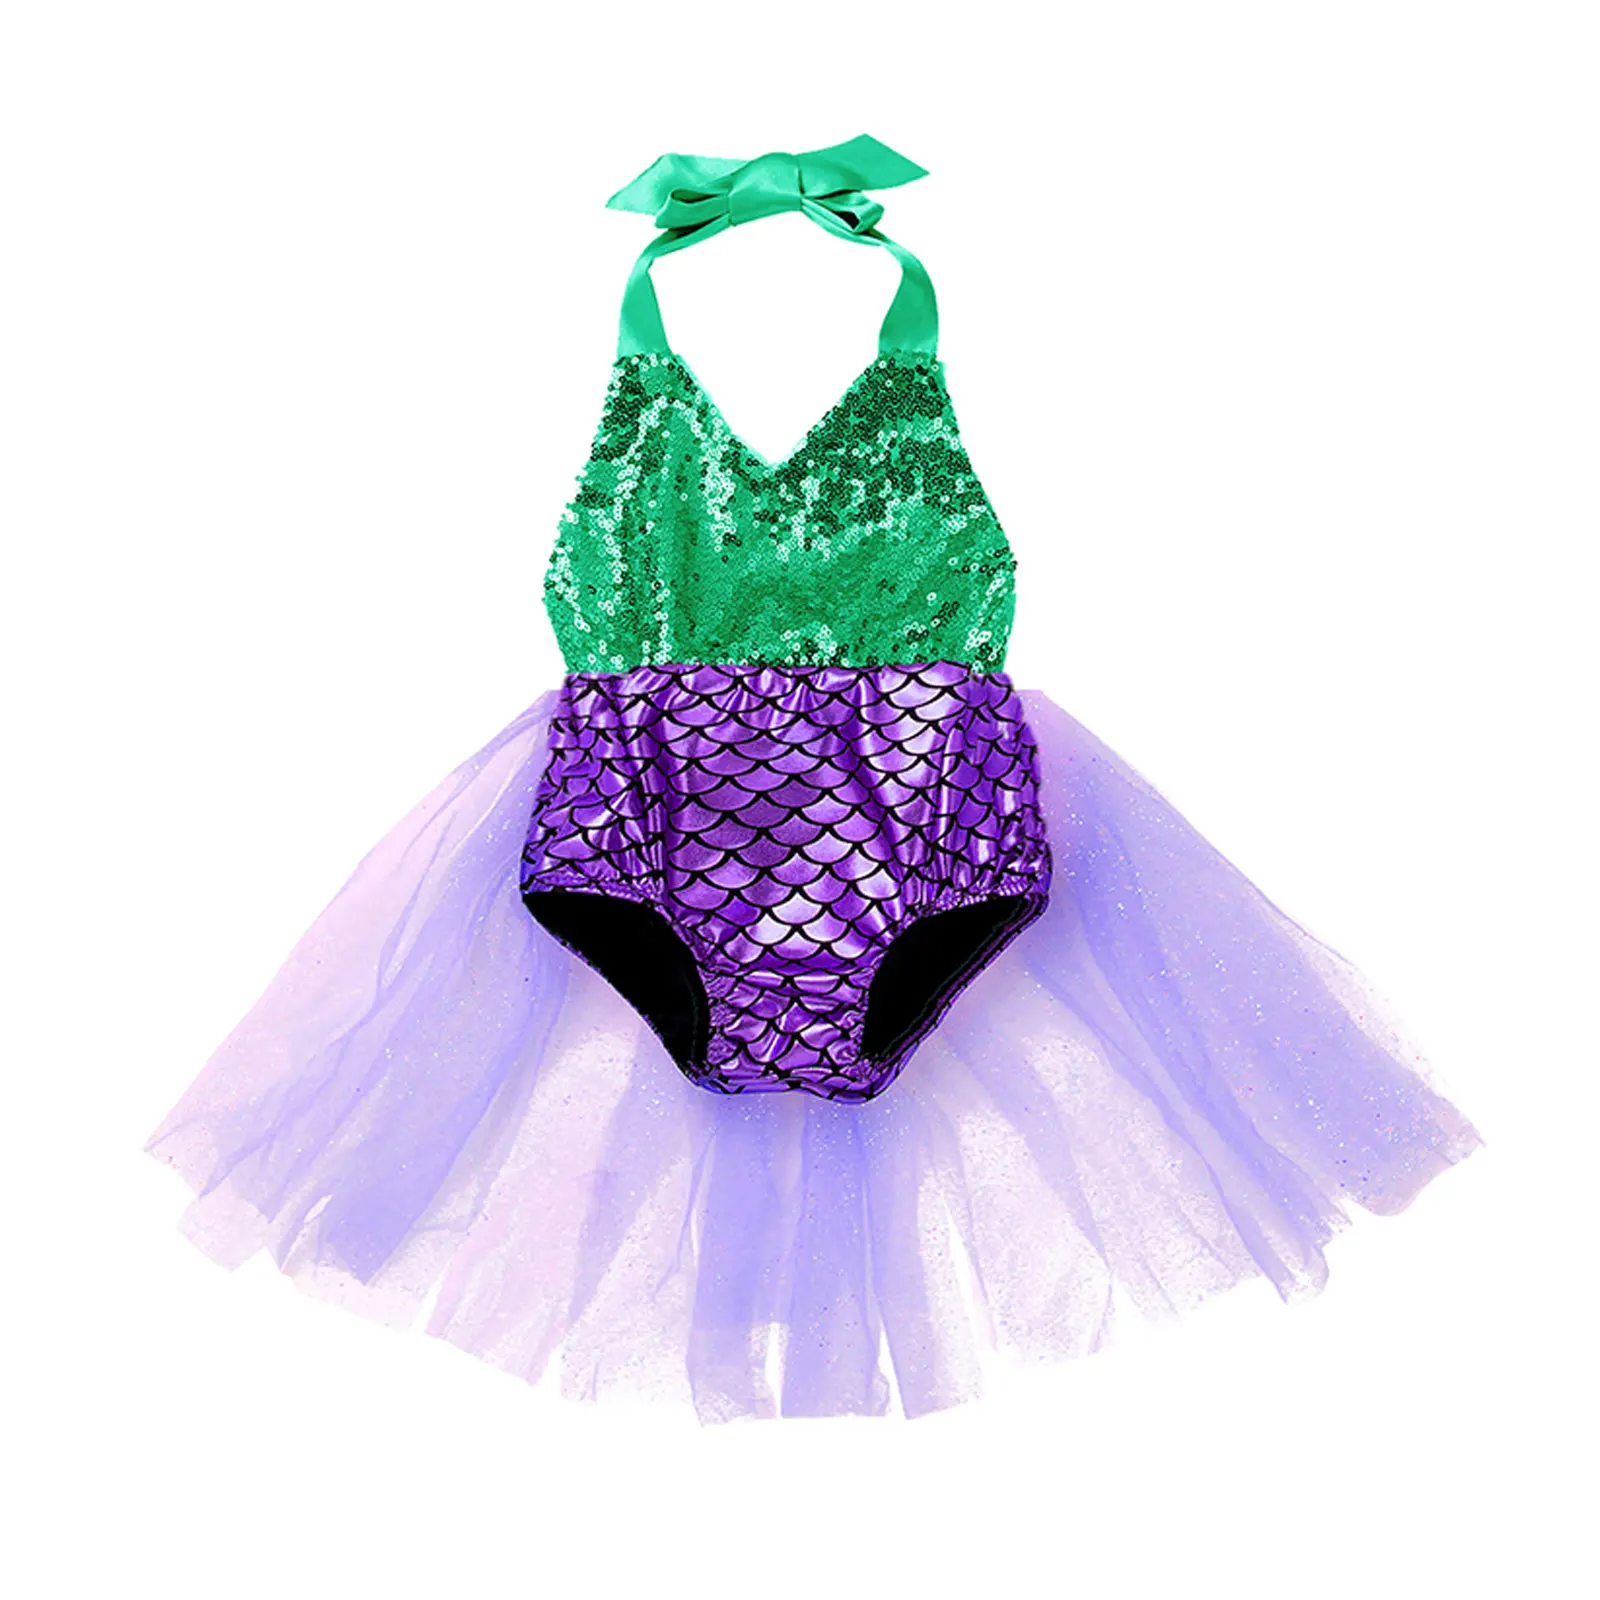 Newborn Sailor Romper Girls Boy Costume Anchor Mermaid Costume Newborn Infant Baby Girls Sequins Mermaid Rompers Jumpsuit Princess Mesh Tutu Dress Outfits Baby Girl Clothing Baby Bodysuits are cool